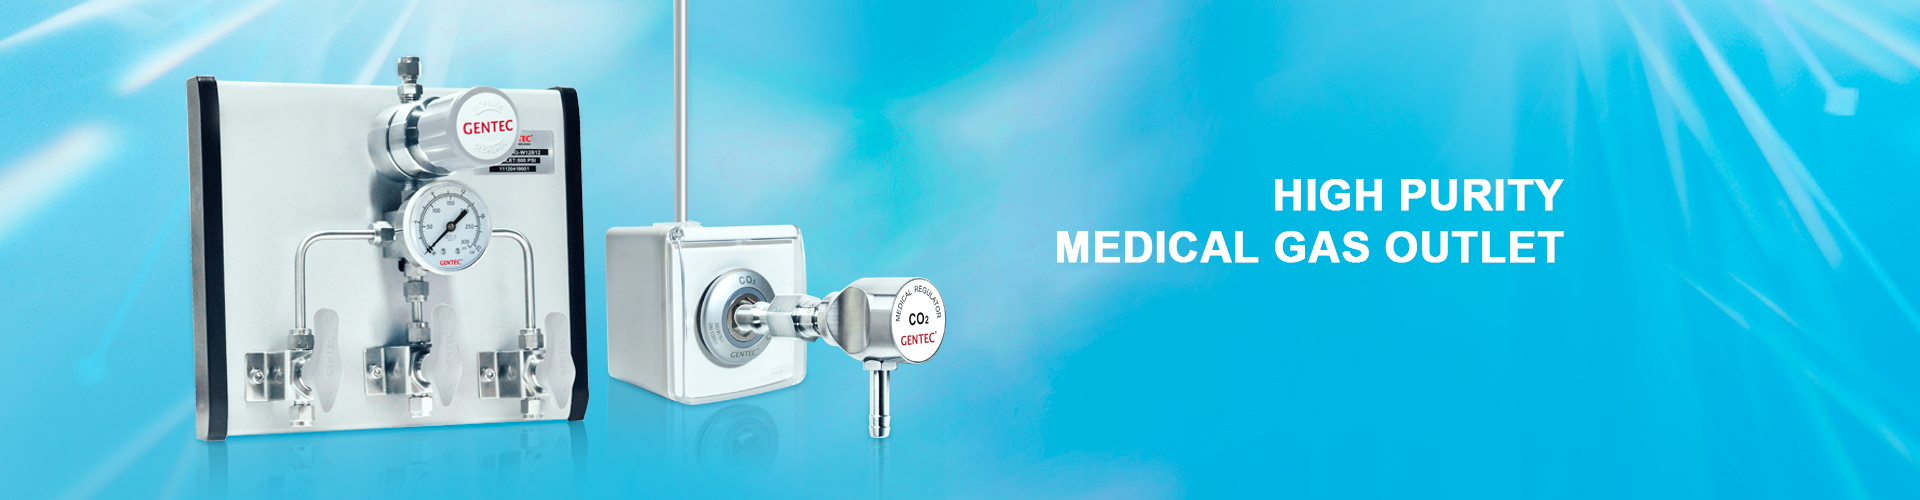 High Purity Medical Gas Outlet